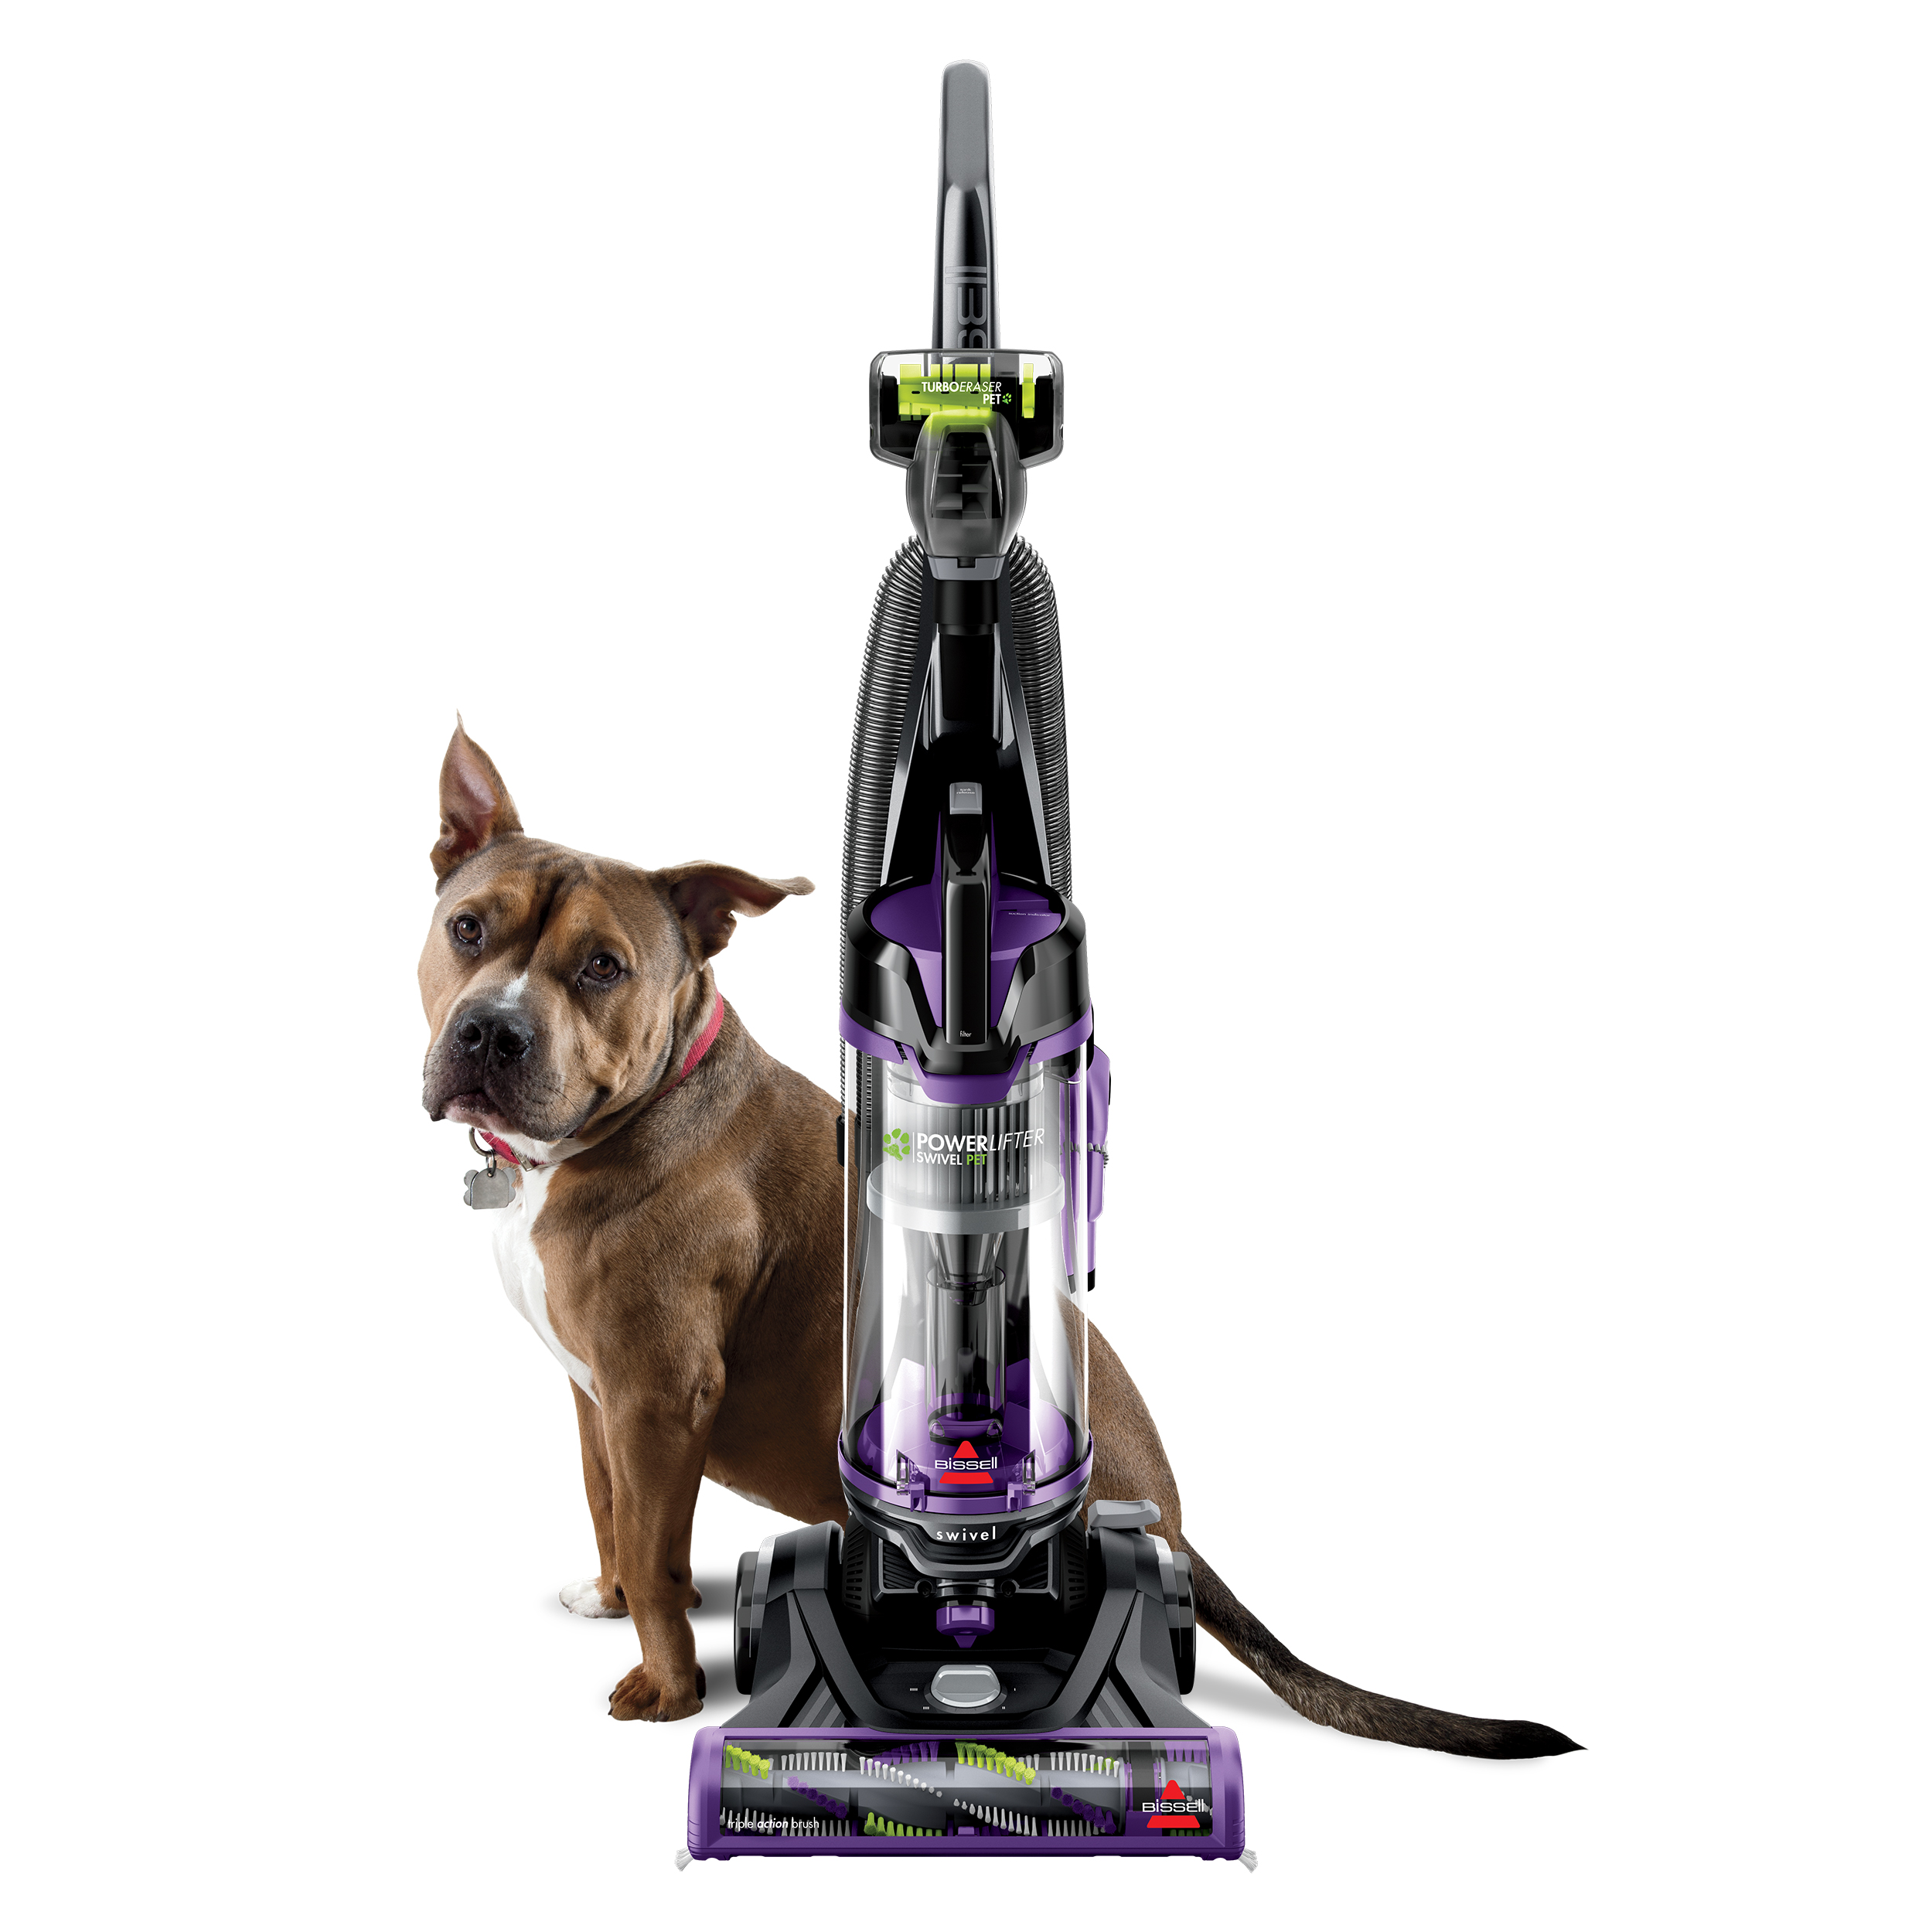 BISSELL Power Lifter Pet with Swivel Bagless Upright Vacuum, 2260 - image 1 of 8